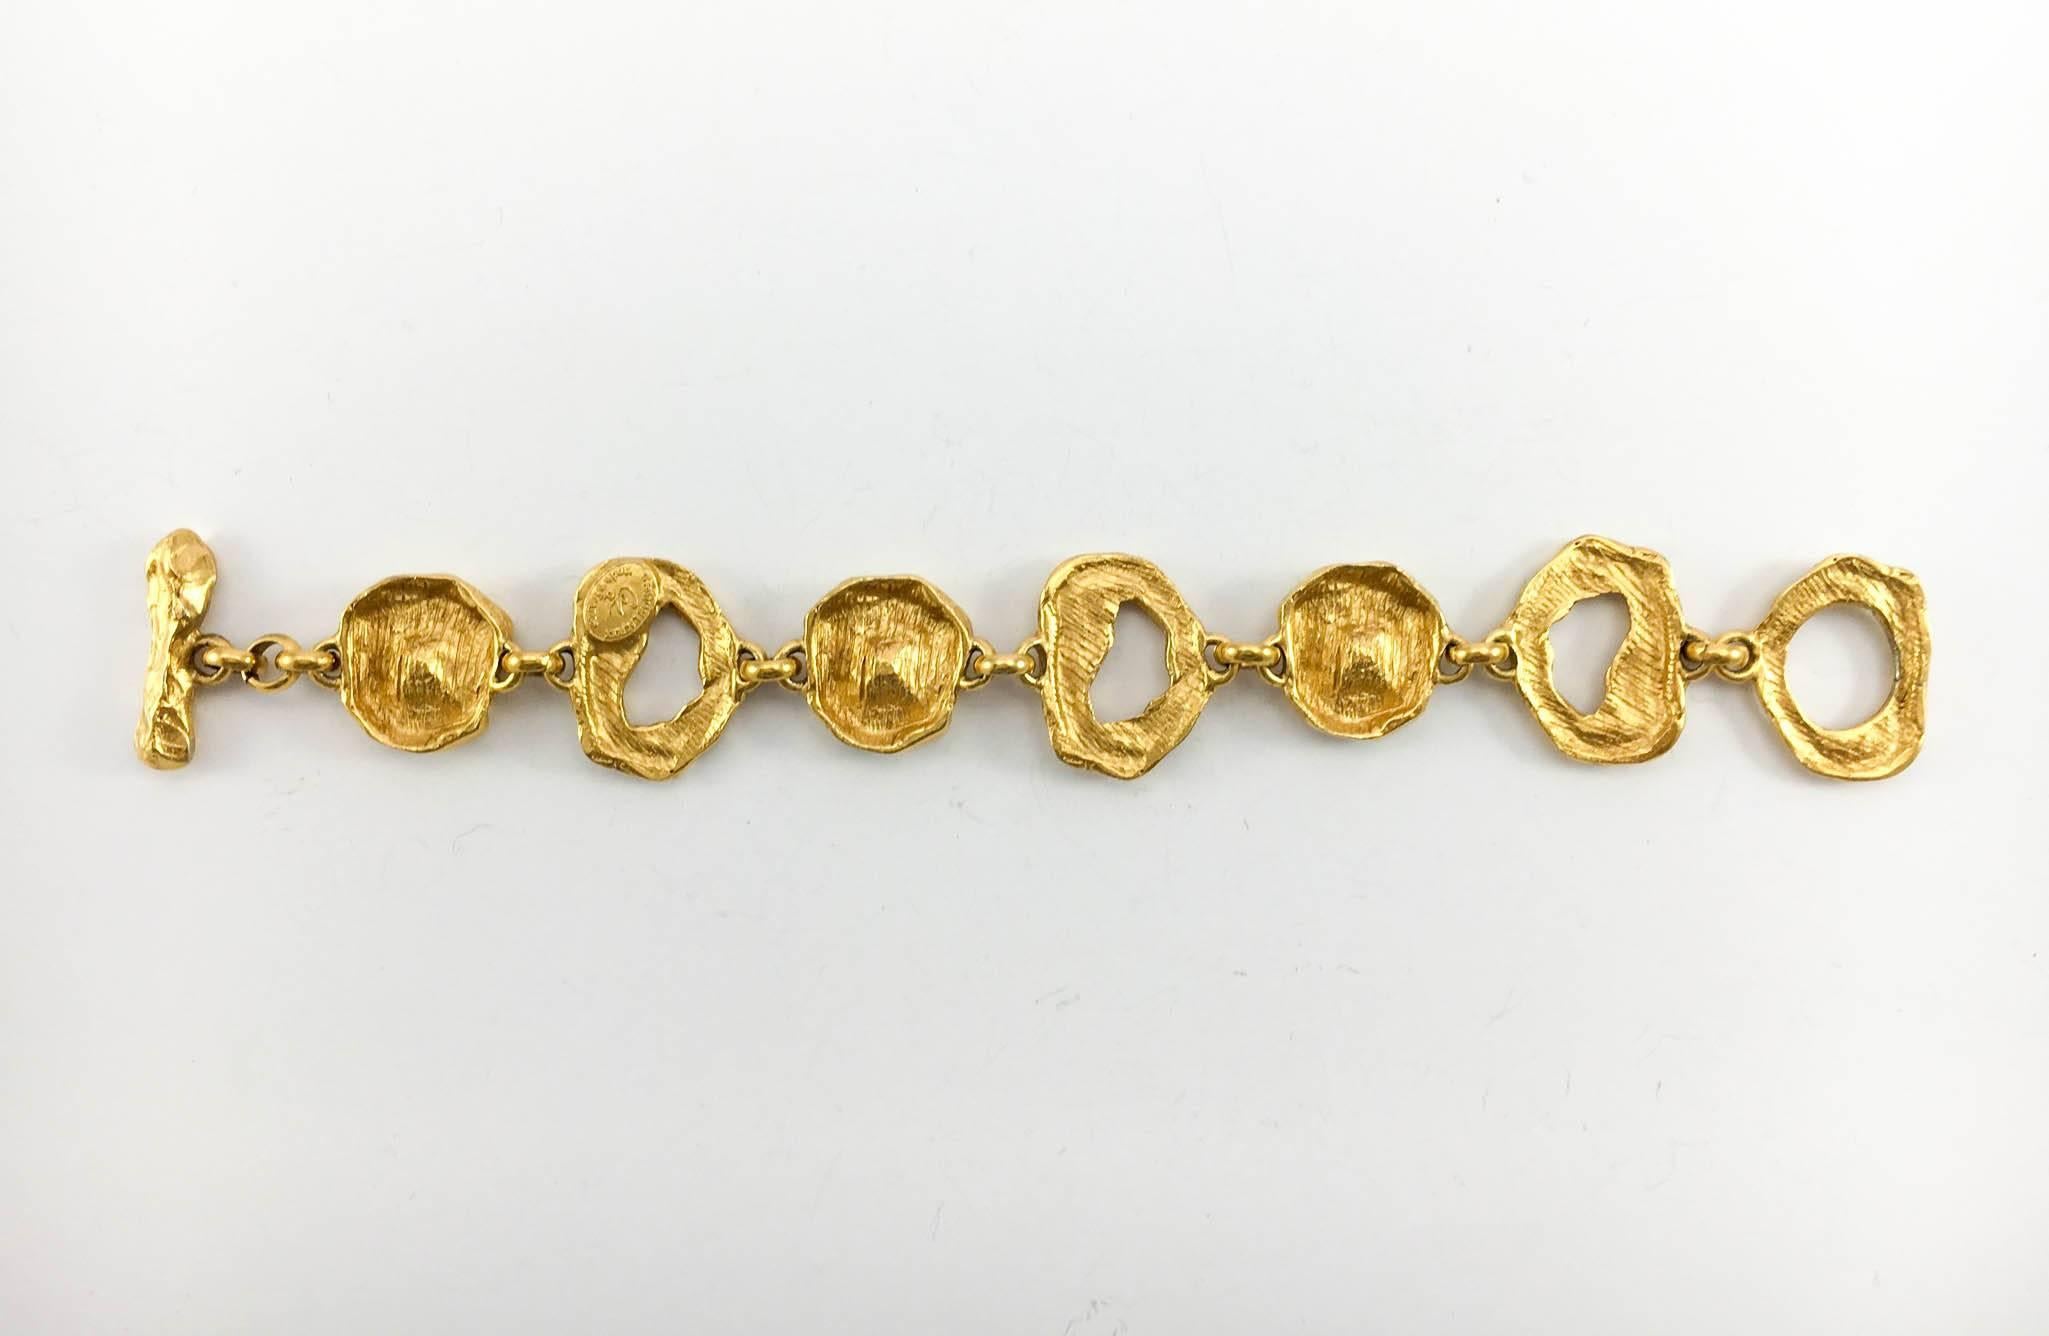 Lacroix Gold-Plated and Rhinestone Bracelet, by Goossens - 1980s 2